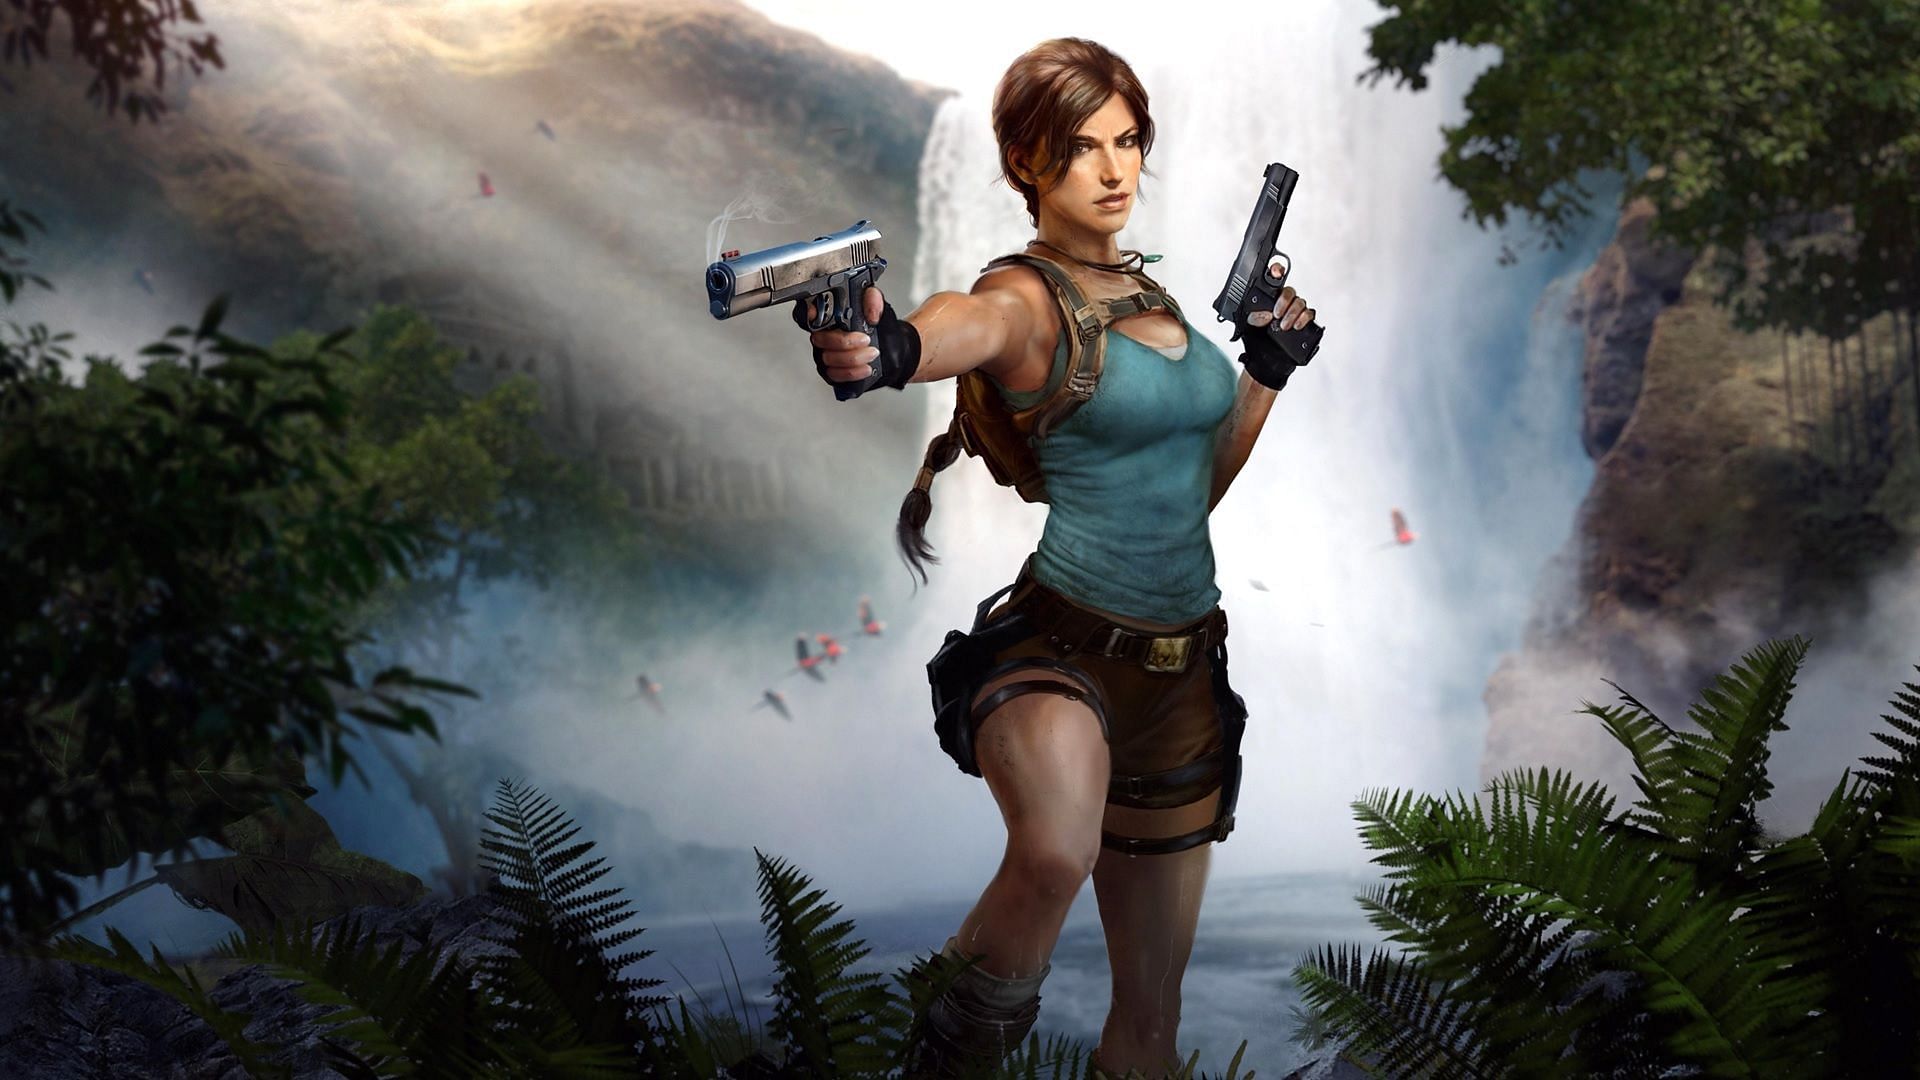 A major announcement with crucial news on the next Tomb Raider game featuring Lara Croft is on its away, according to Amazon Games